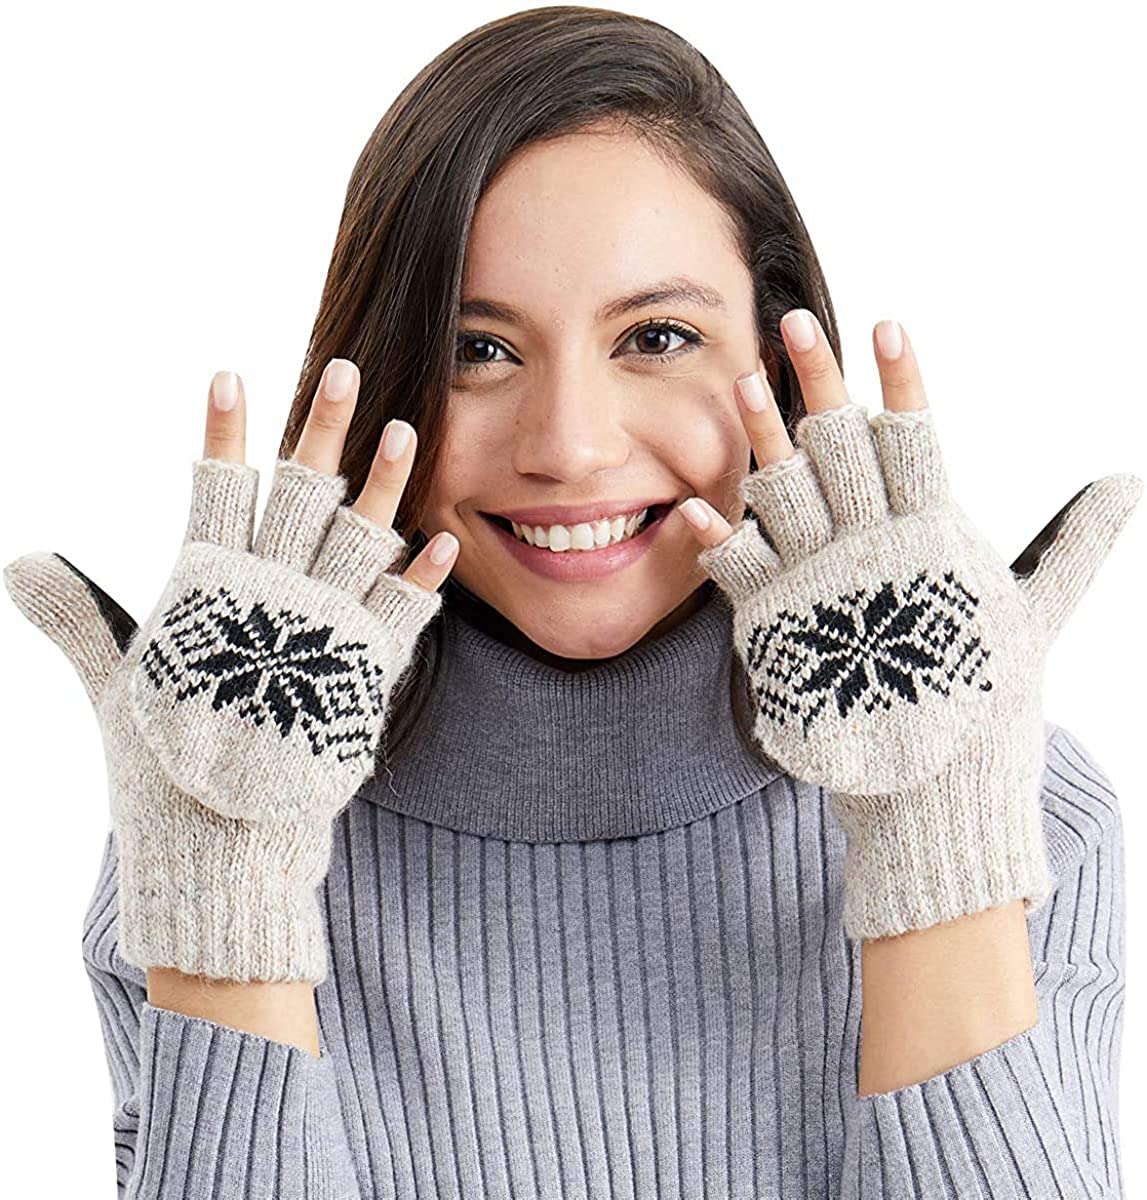 Metog Suede Thinsulate Thermal Insulation Mittens,Gloves 